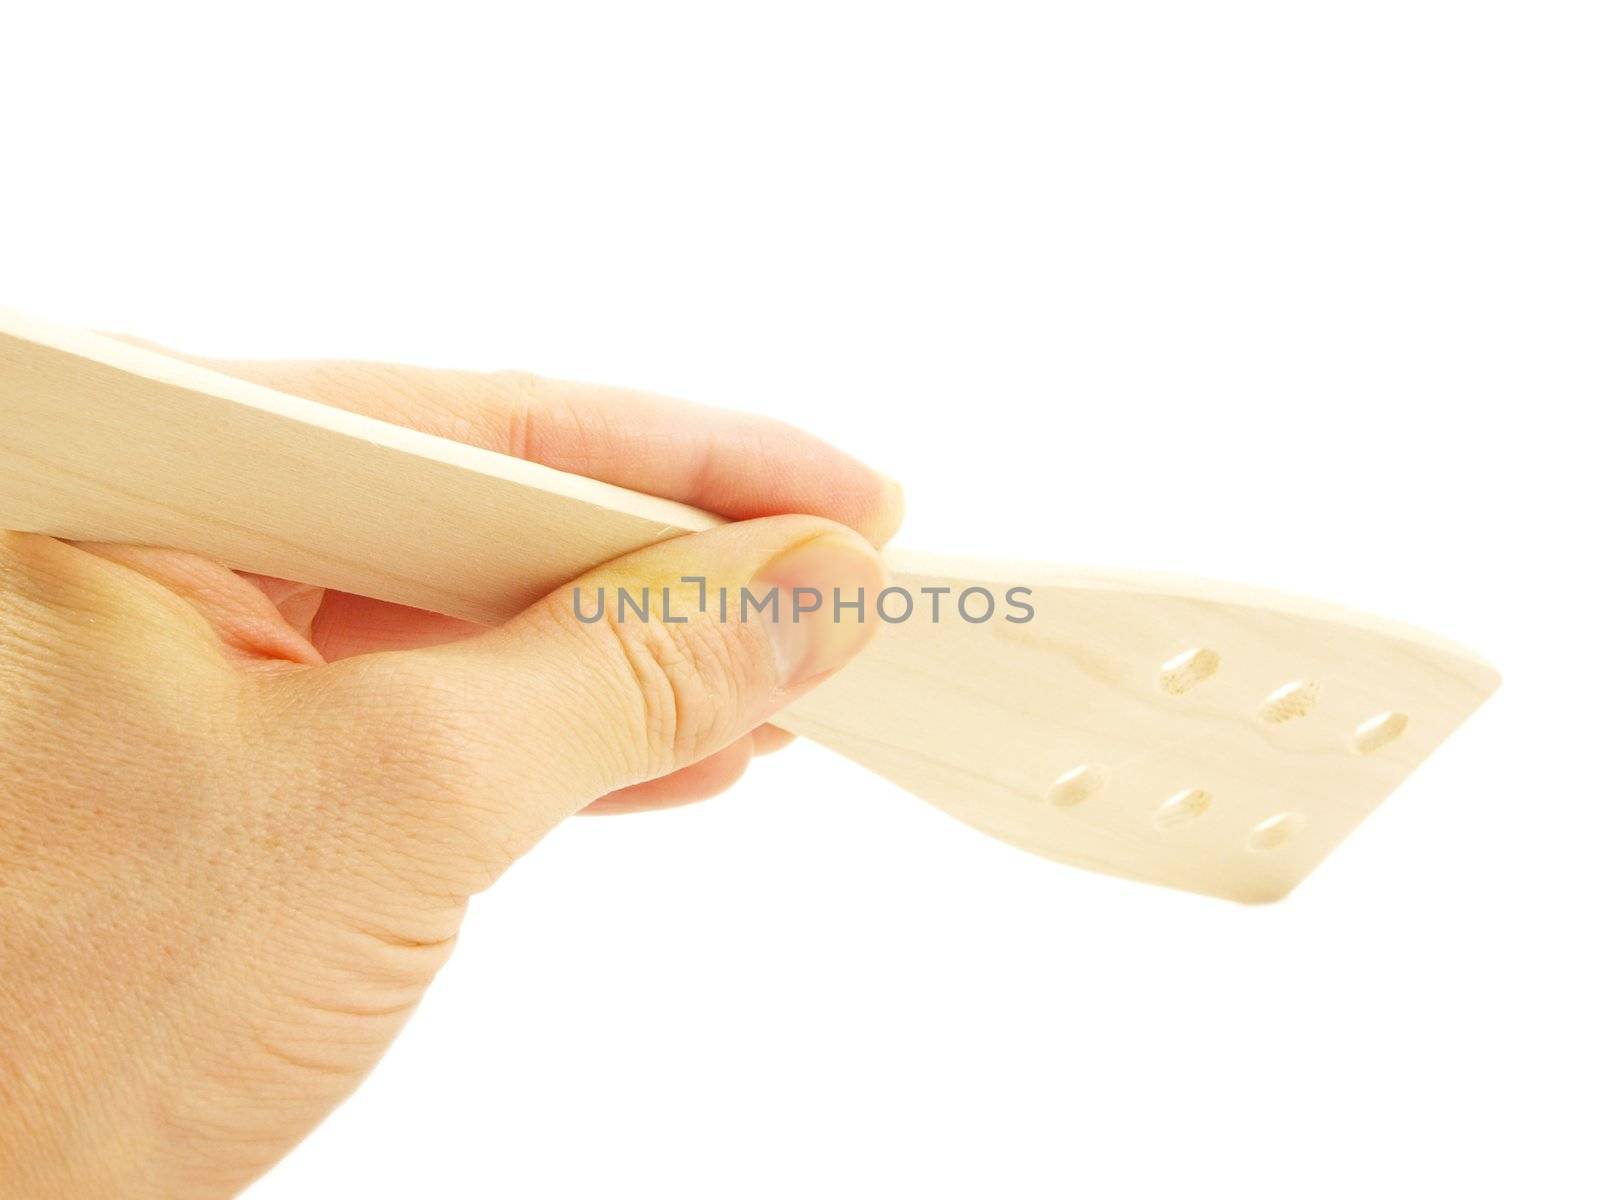 Person holding a wooden flat spatula, isolated towards white background